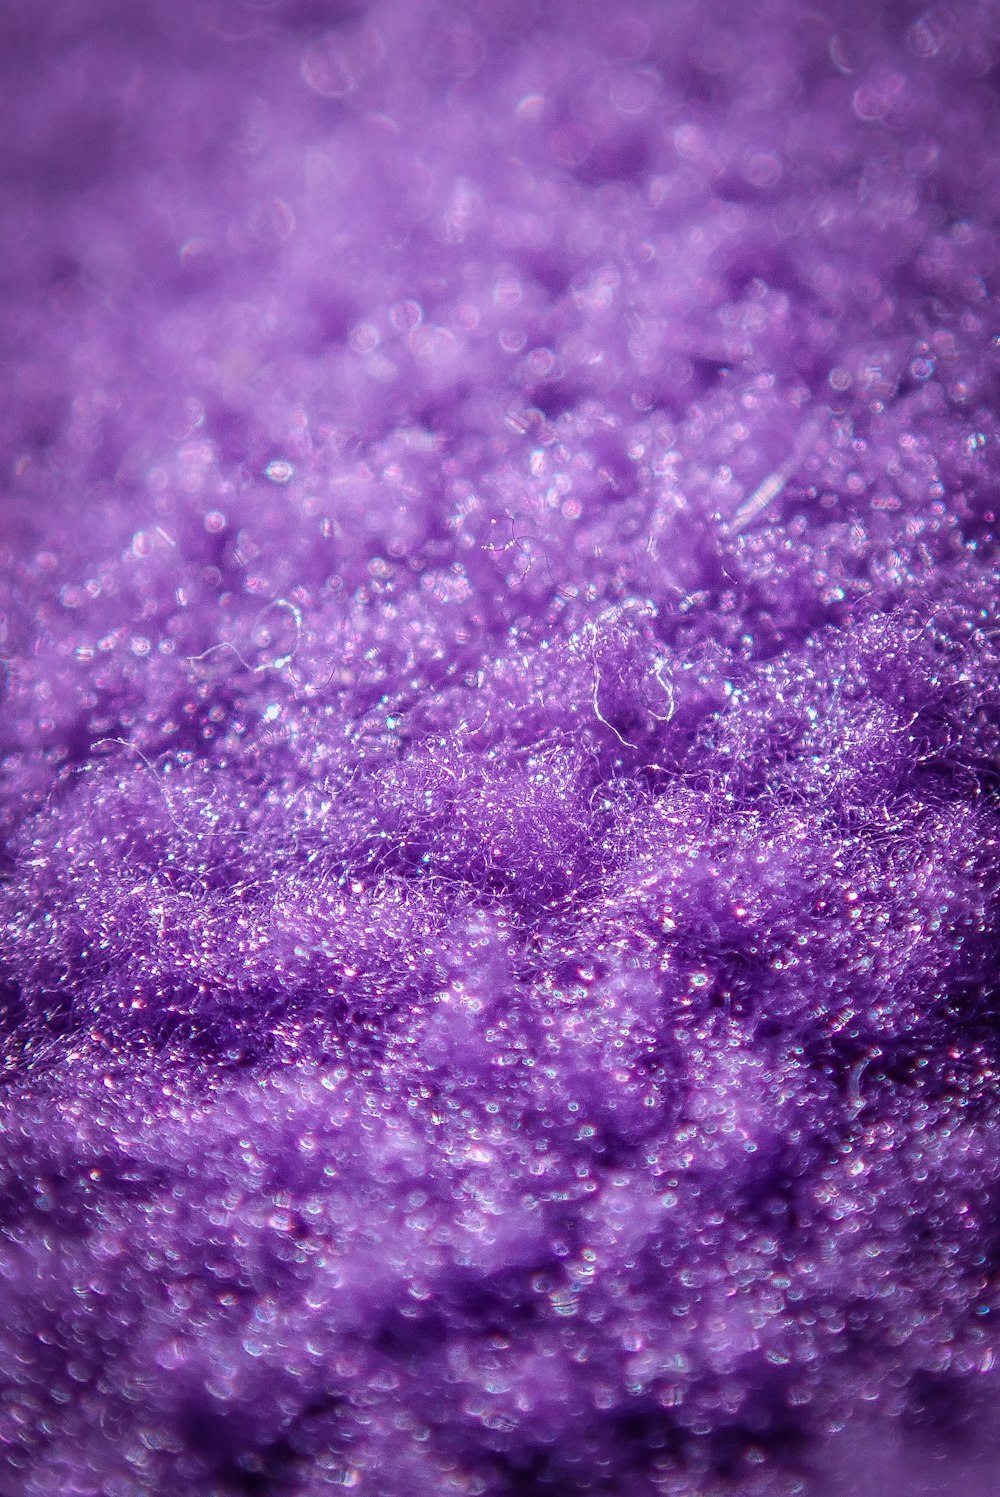 a close up view of a purple substance